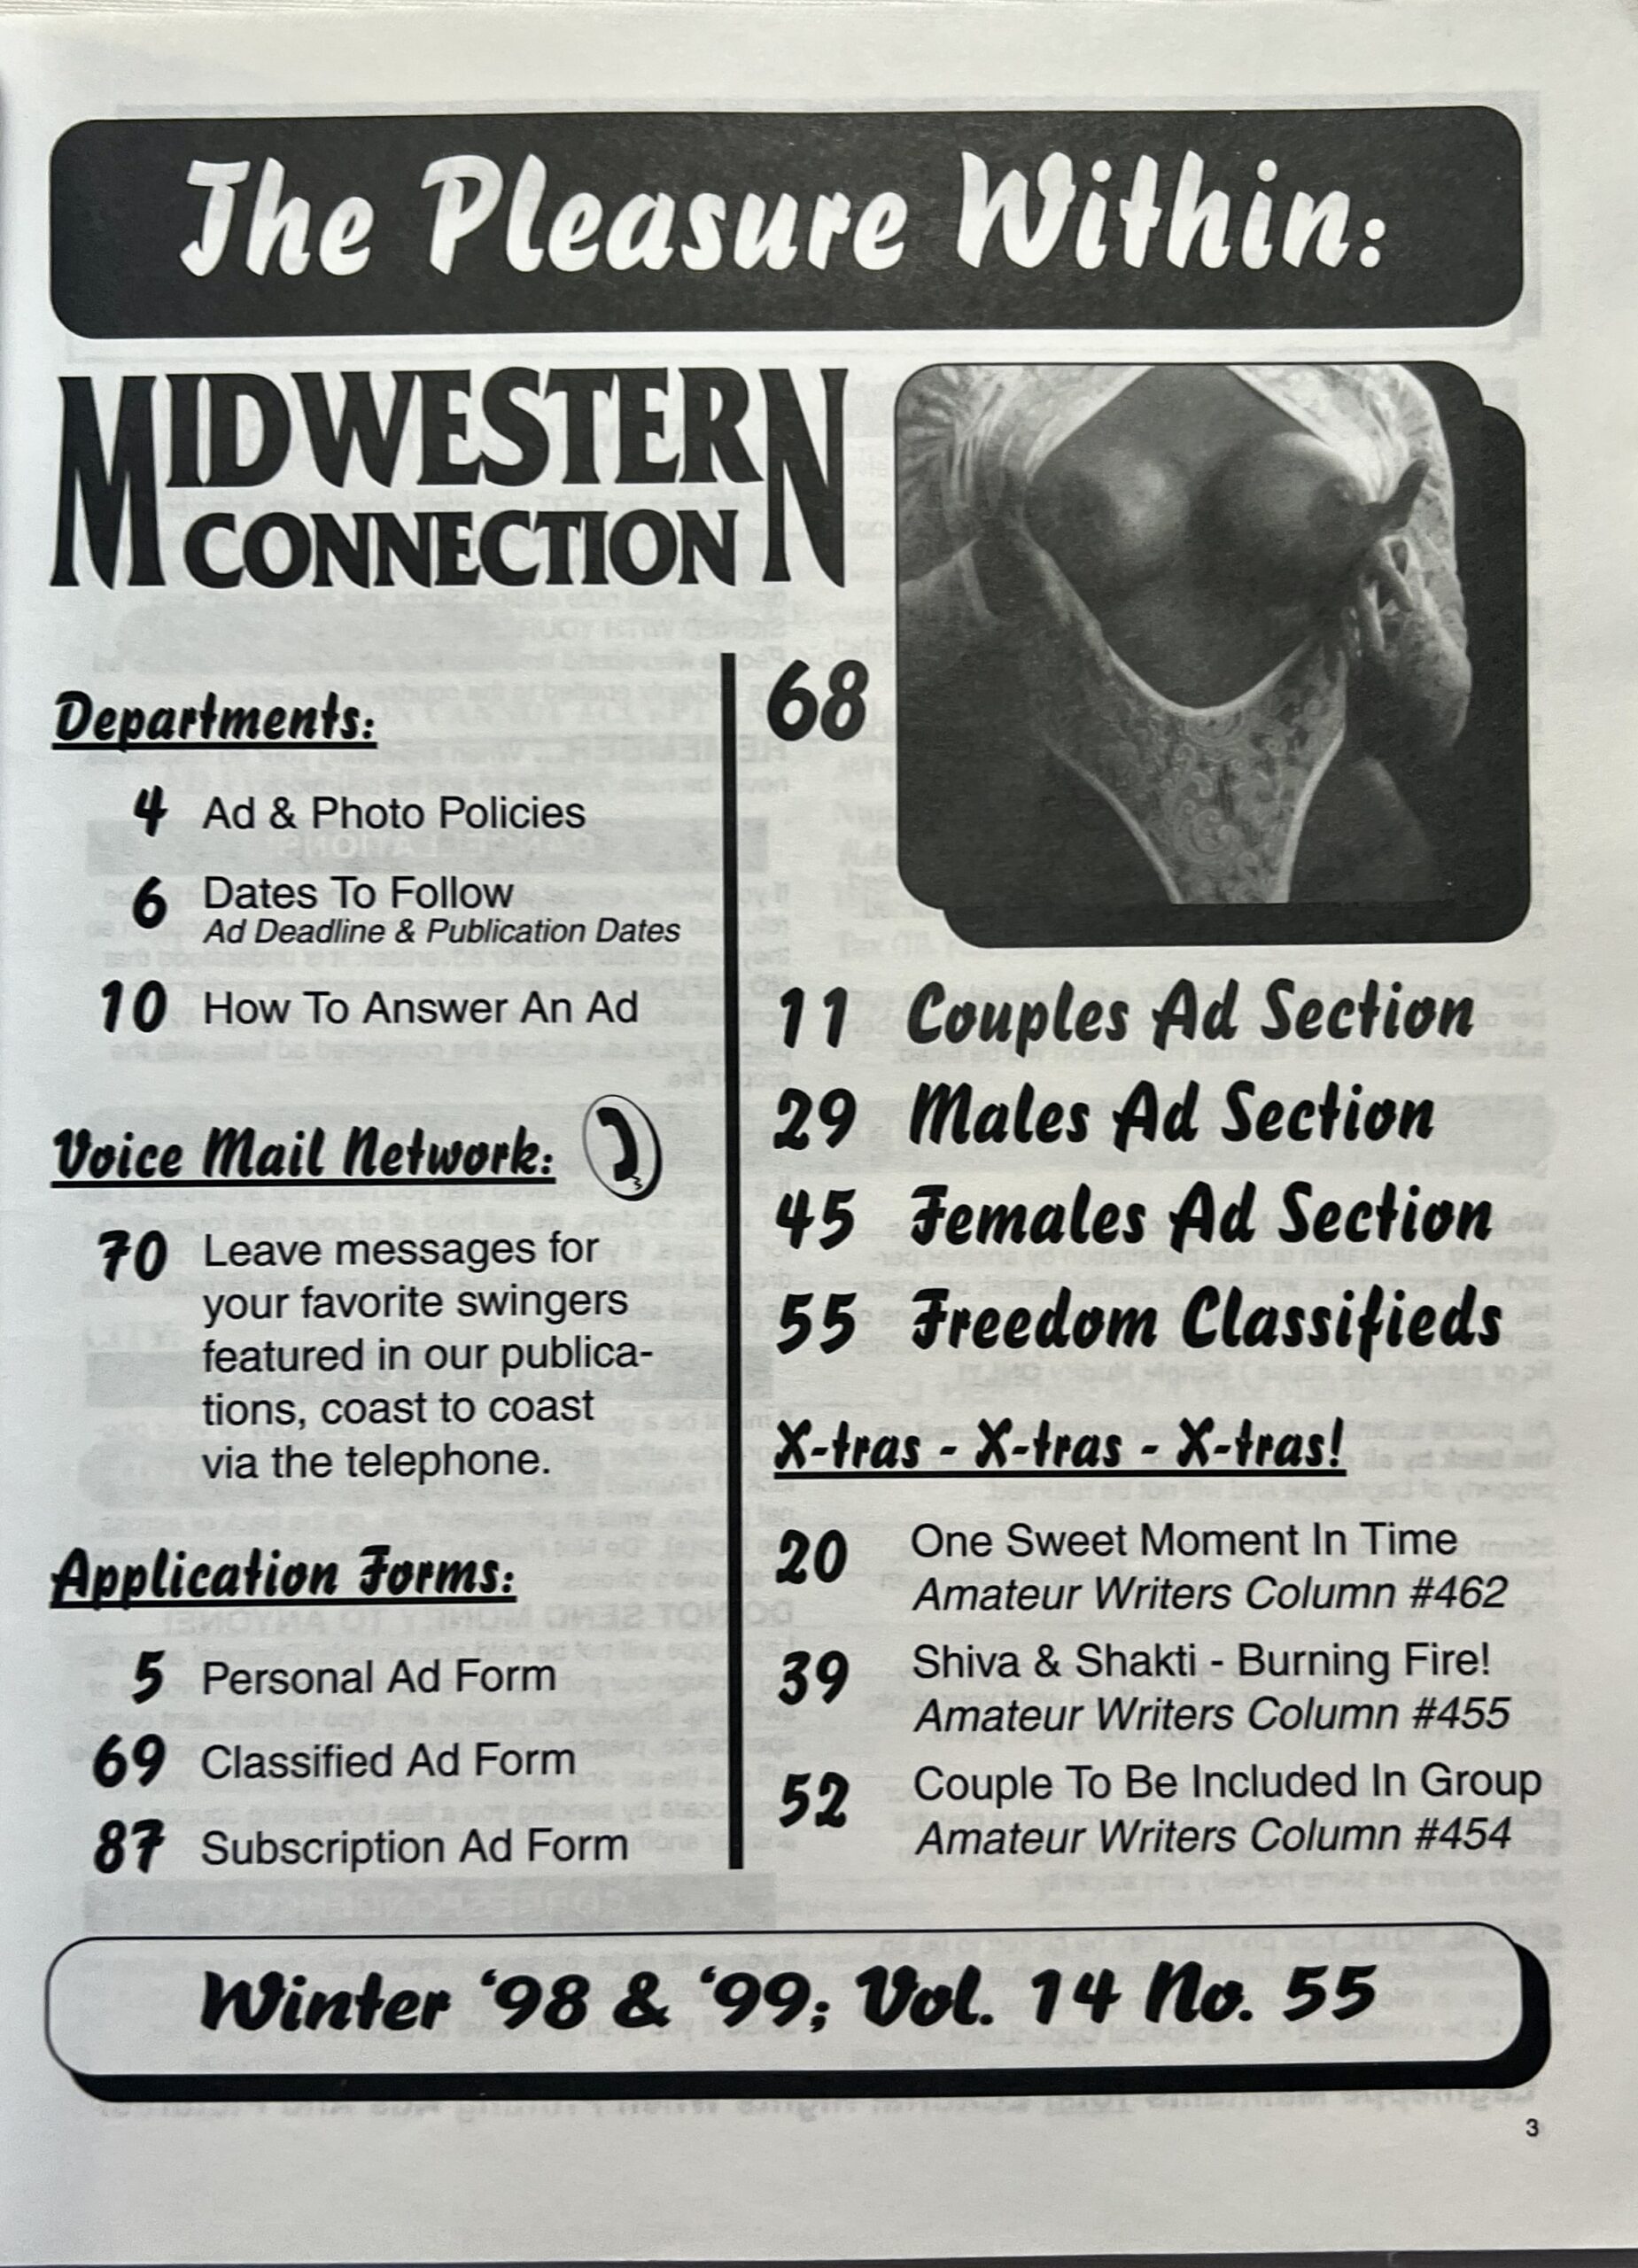 Mid Western Connection 17/66 December 1998 Swingers and Personals Magazine -Heart Attack- Vintage Magazines 16 picture picture